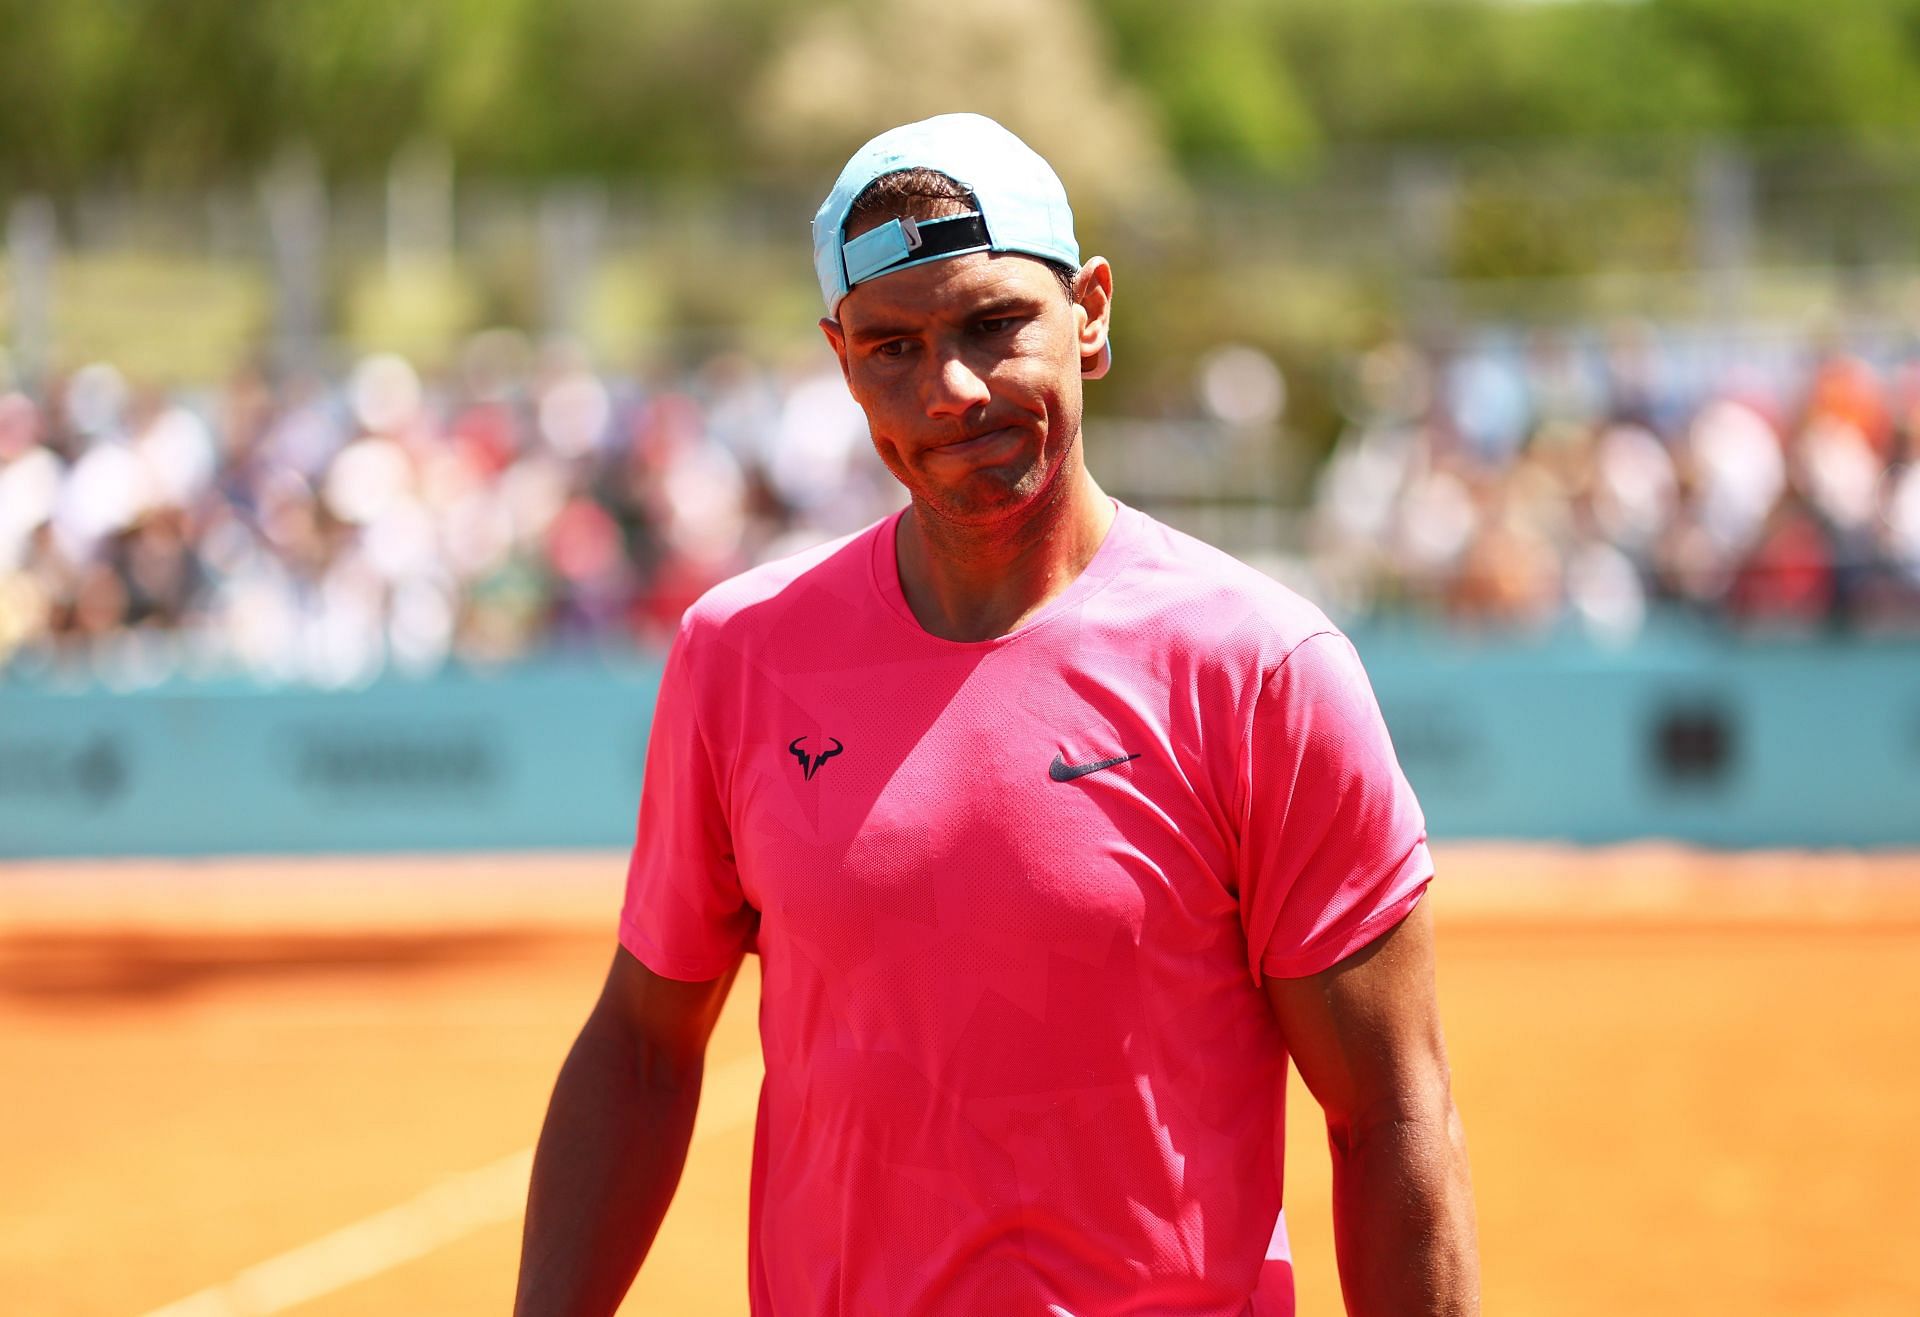 Rafael Nadals next match Opponent, venue, live streaming, TV channel and schedule Madrid Open 2022 2nd Round